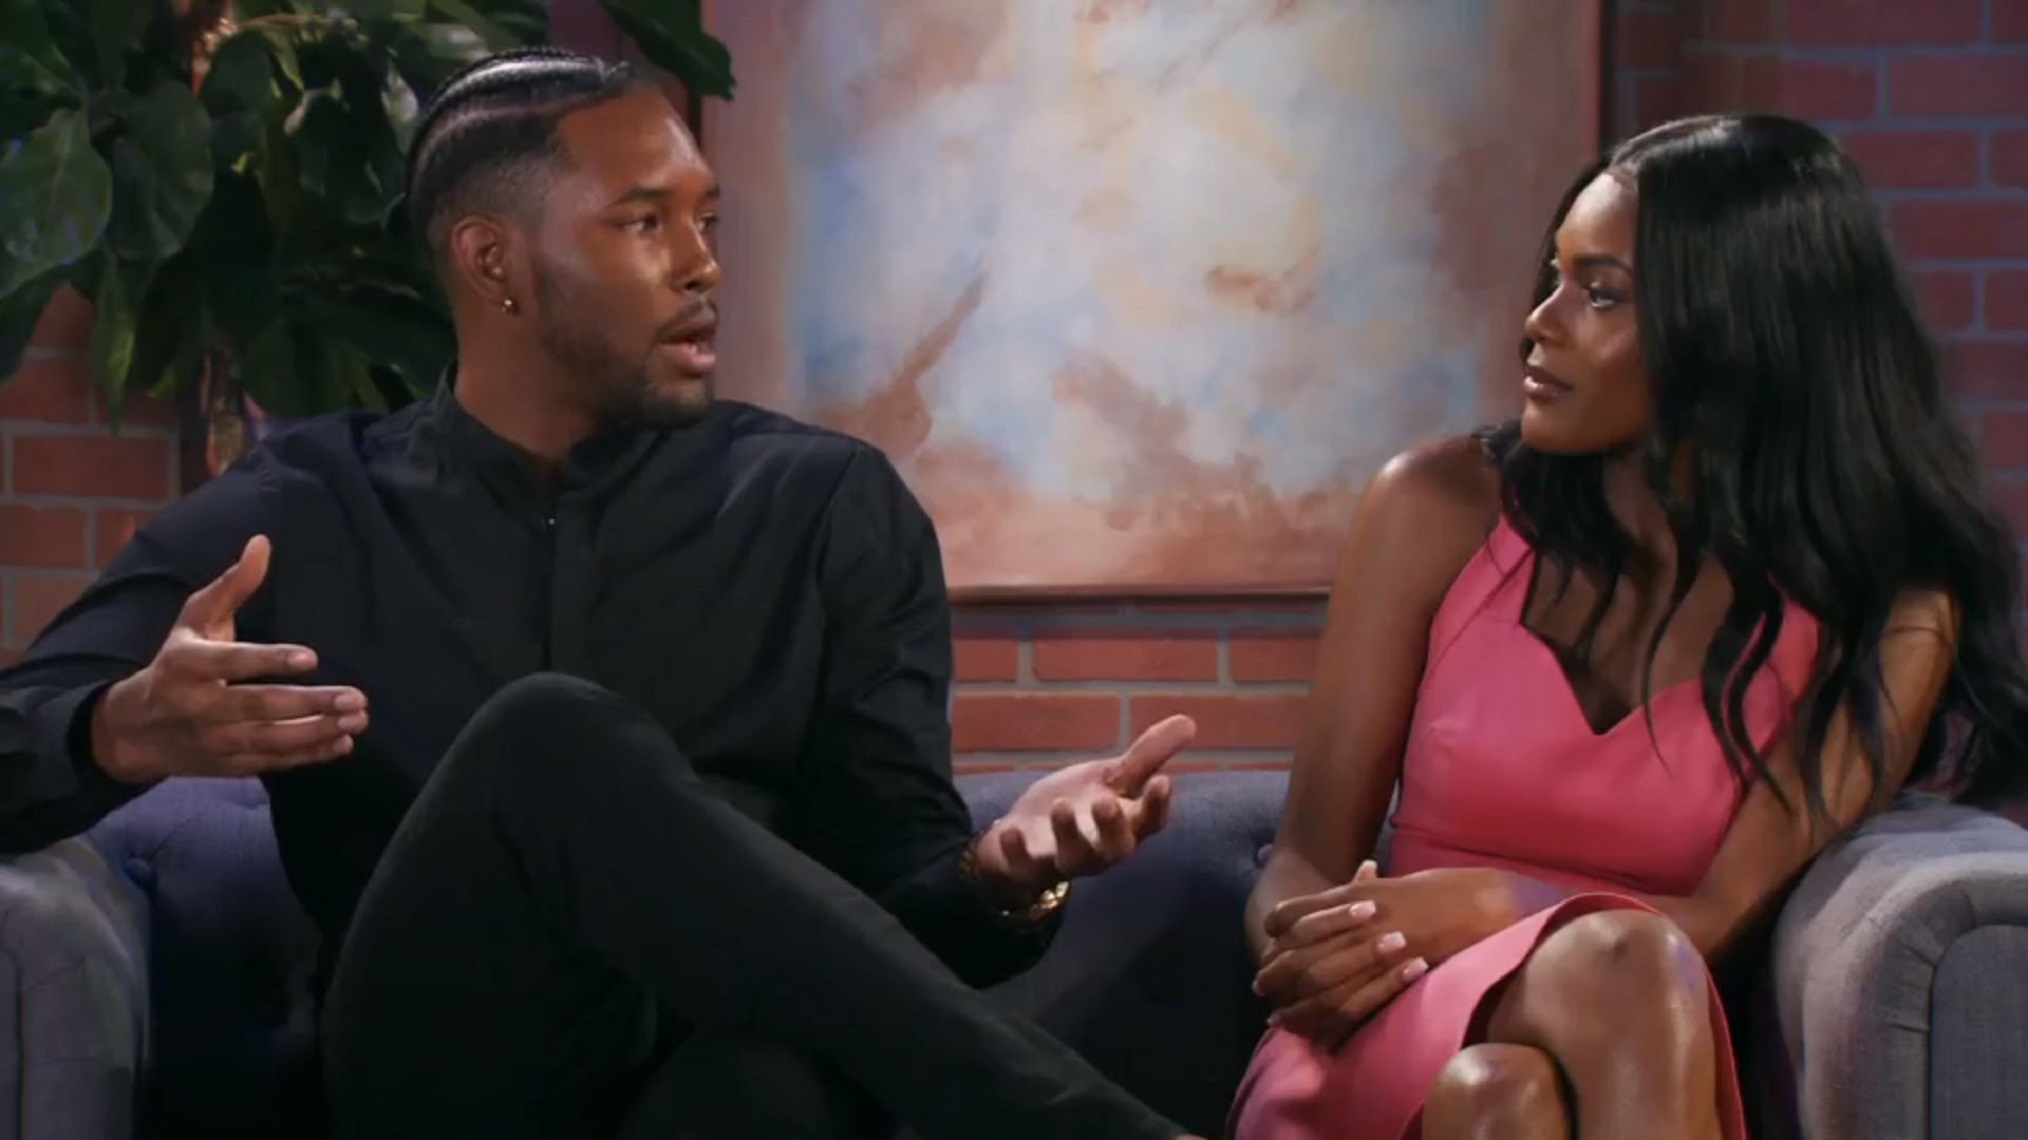 'Married at First Sight' 10 Key Moments From 'Finale Reunion' (RECAP)